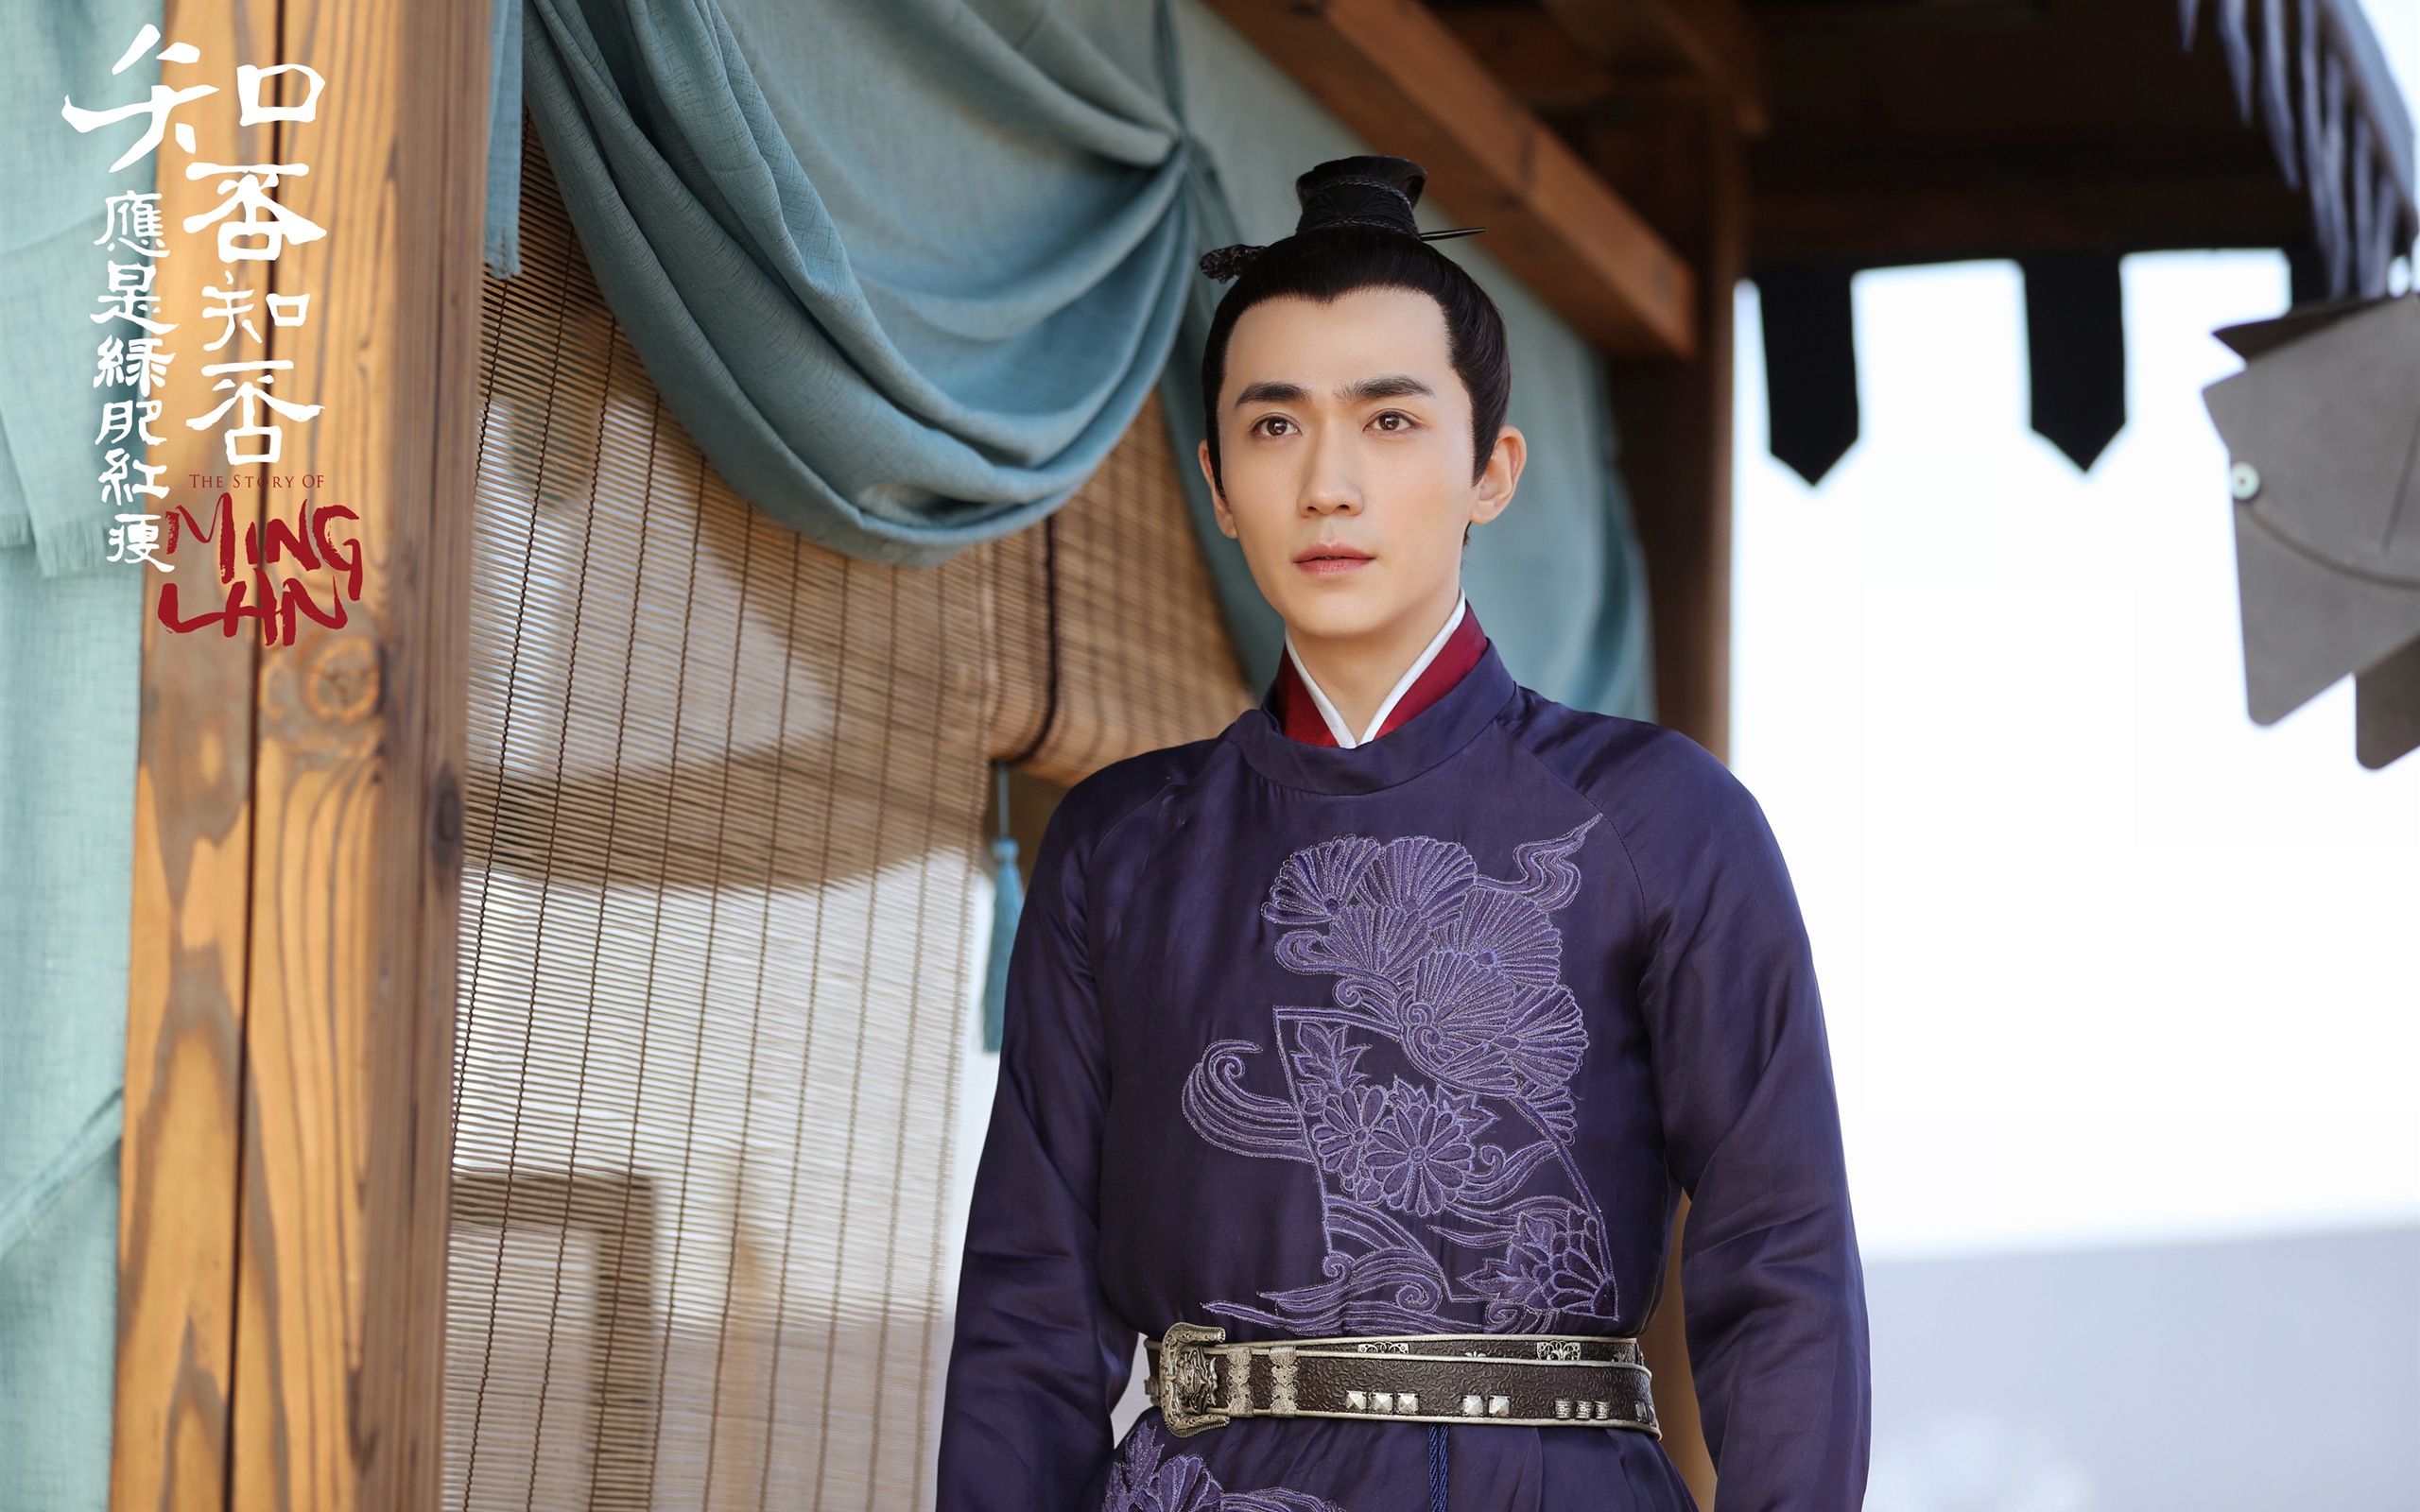 The Story Of MingLan, TV series HD wallpapers #24 - 2560x1600